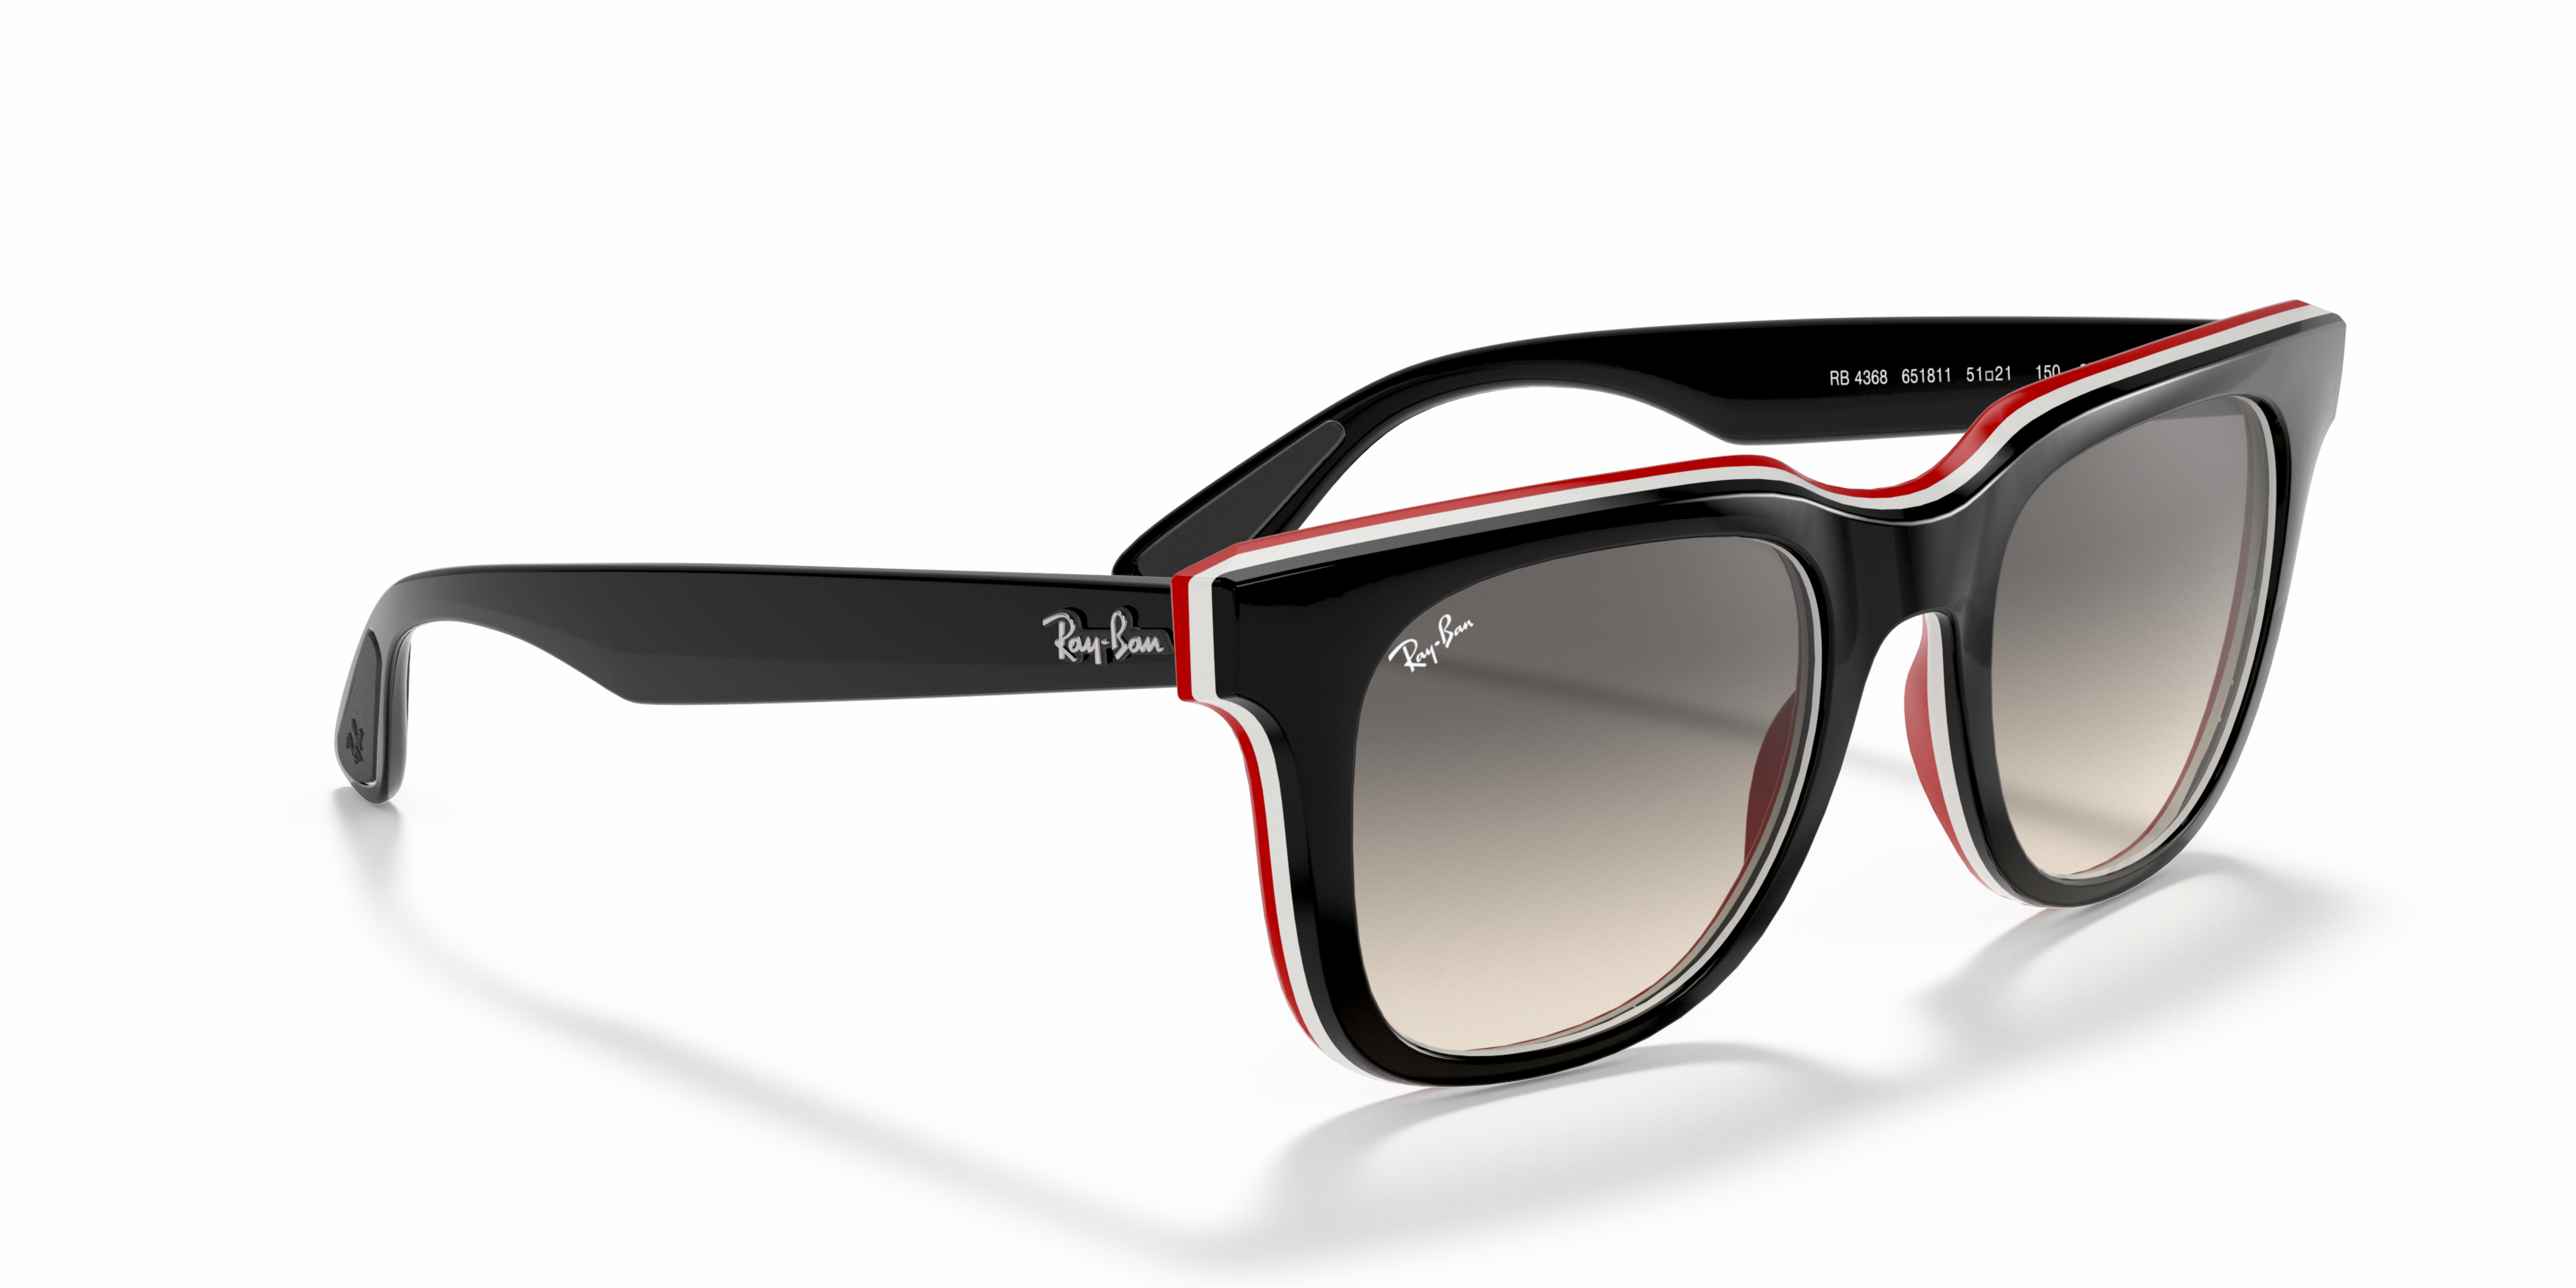 [products.image.angle_right01] Ray-Ban RB4368 651811